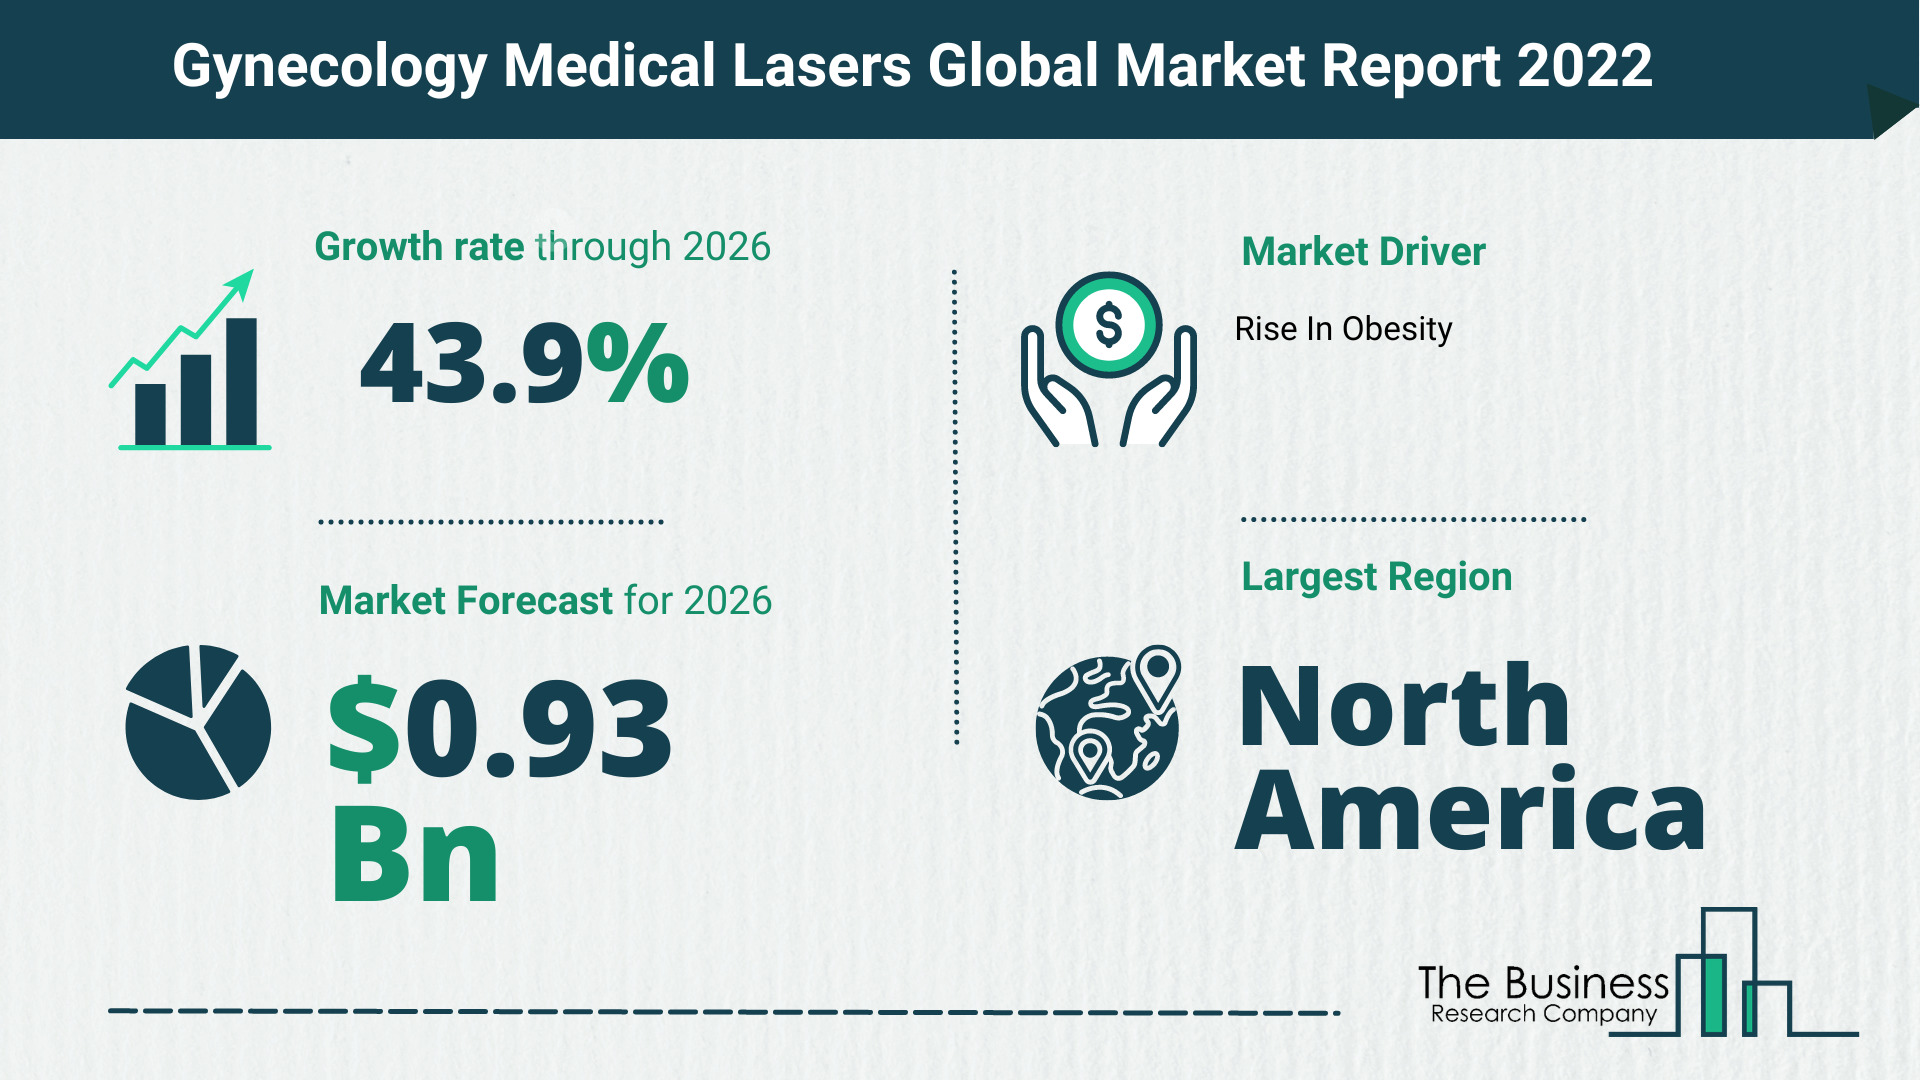 Global Gynecology Medical Lasers Market 2022 – Market Opportunities And Strategies